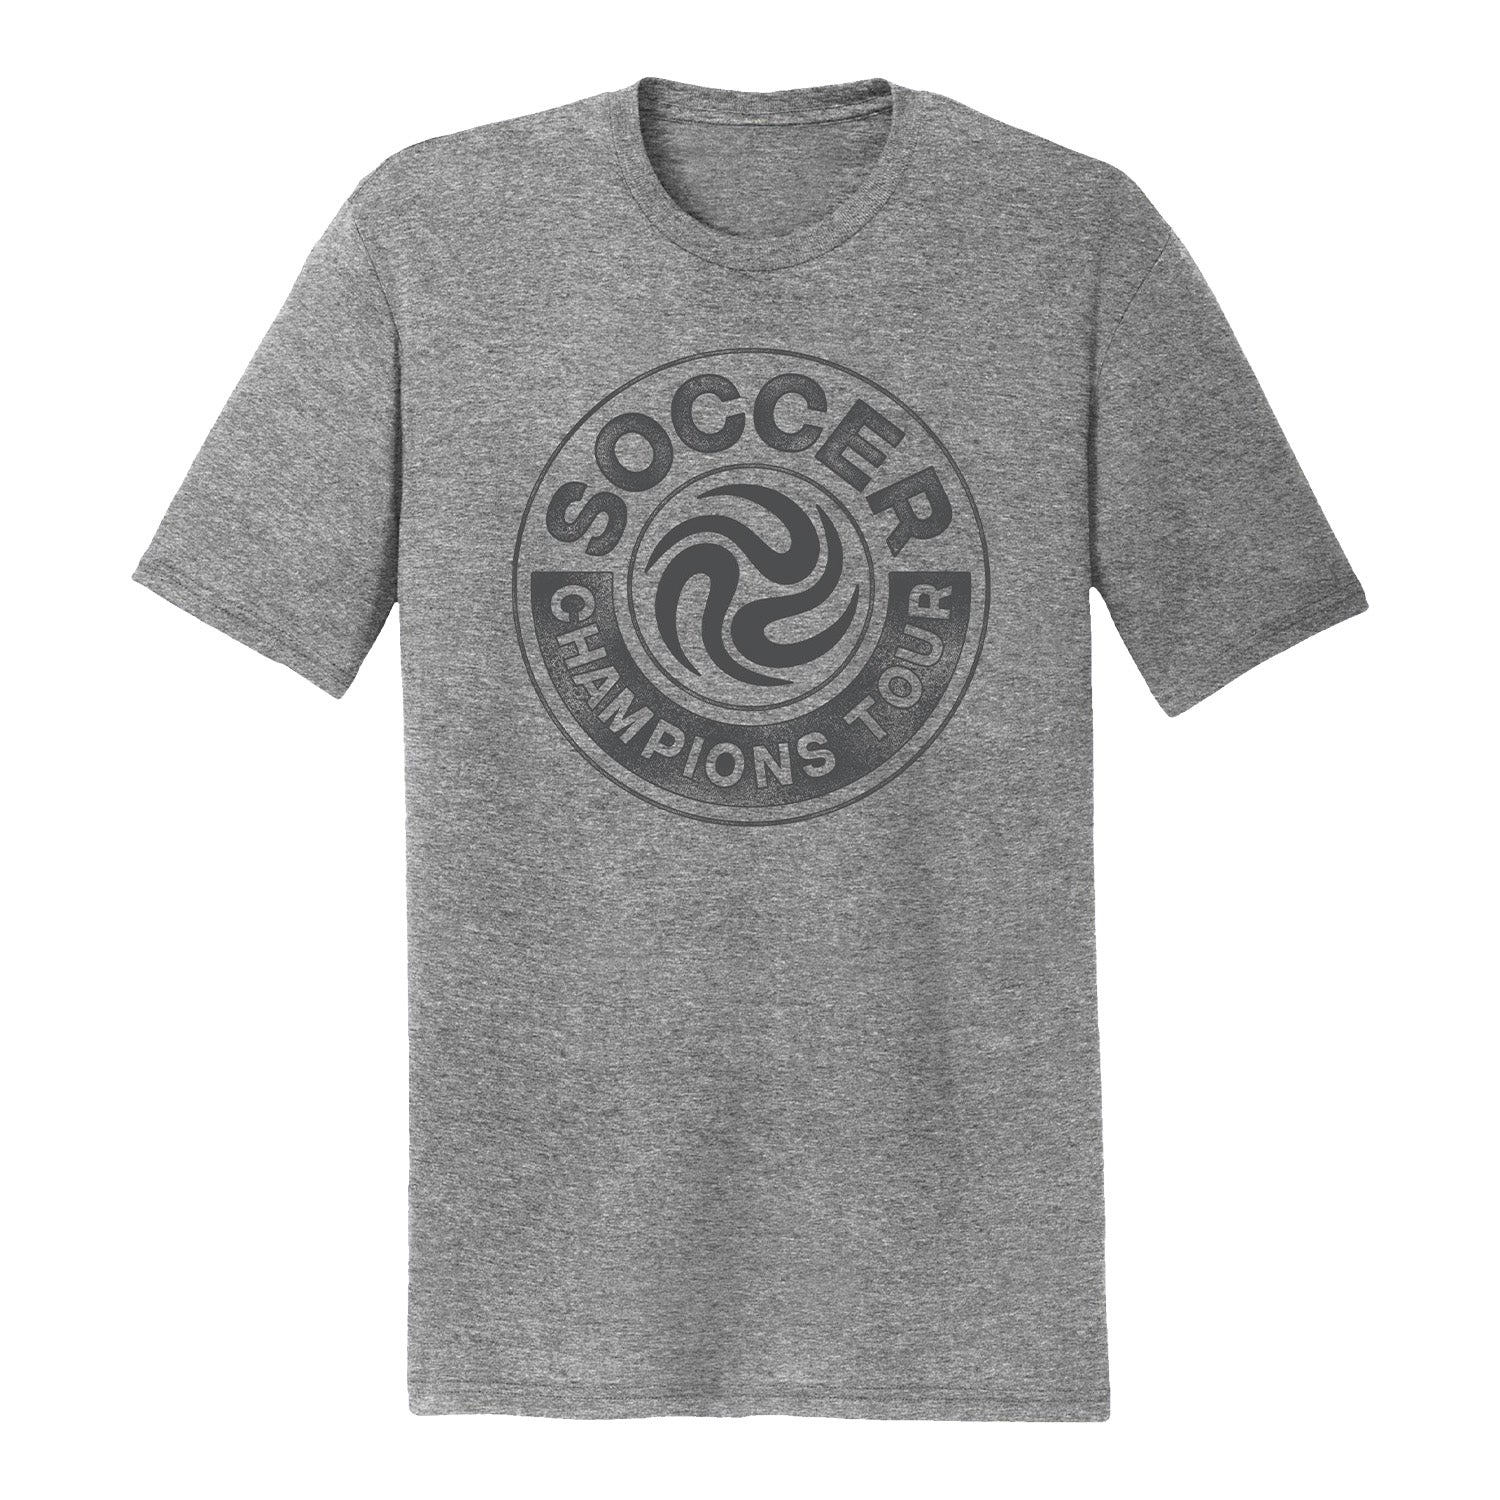 Unisex Soccer Champions Tour Grey Tee - Front View